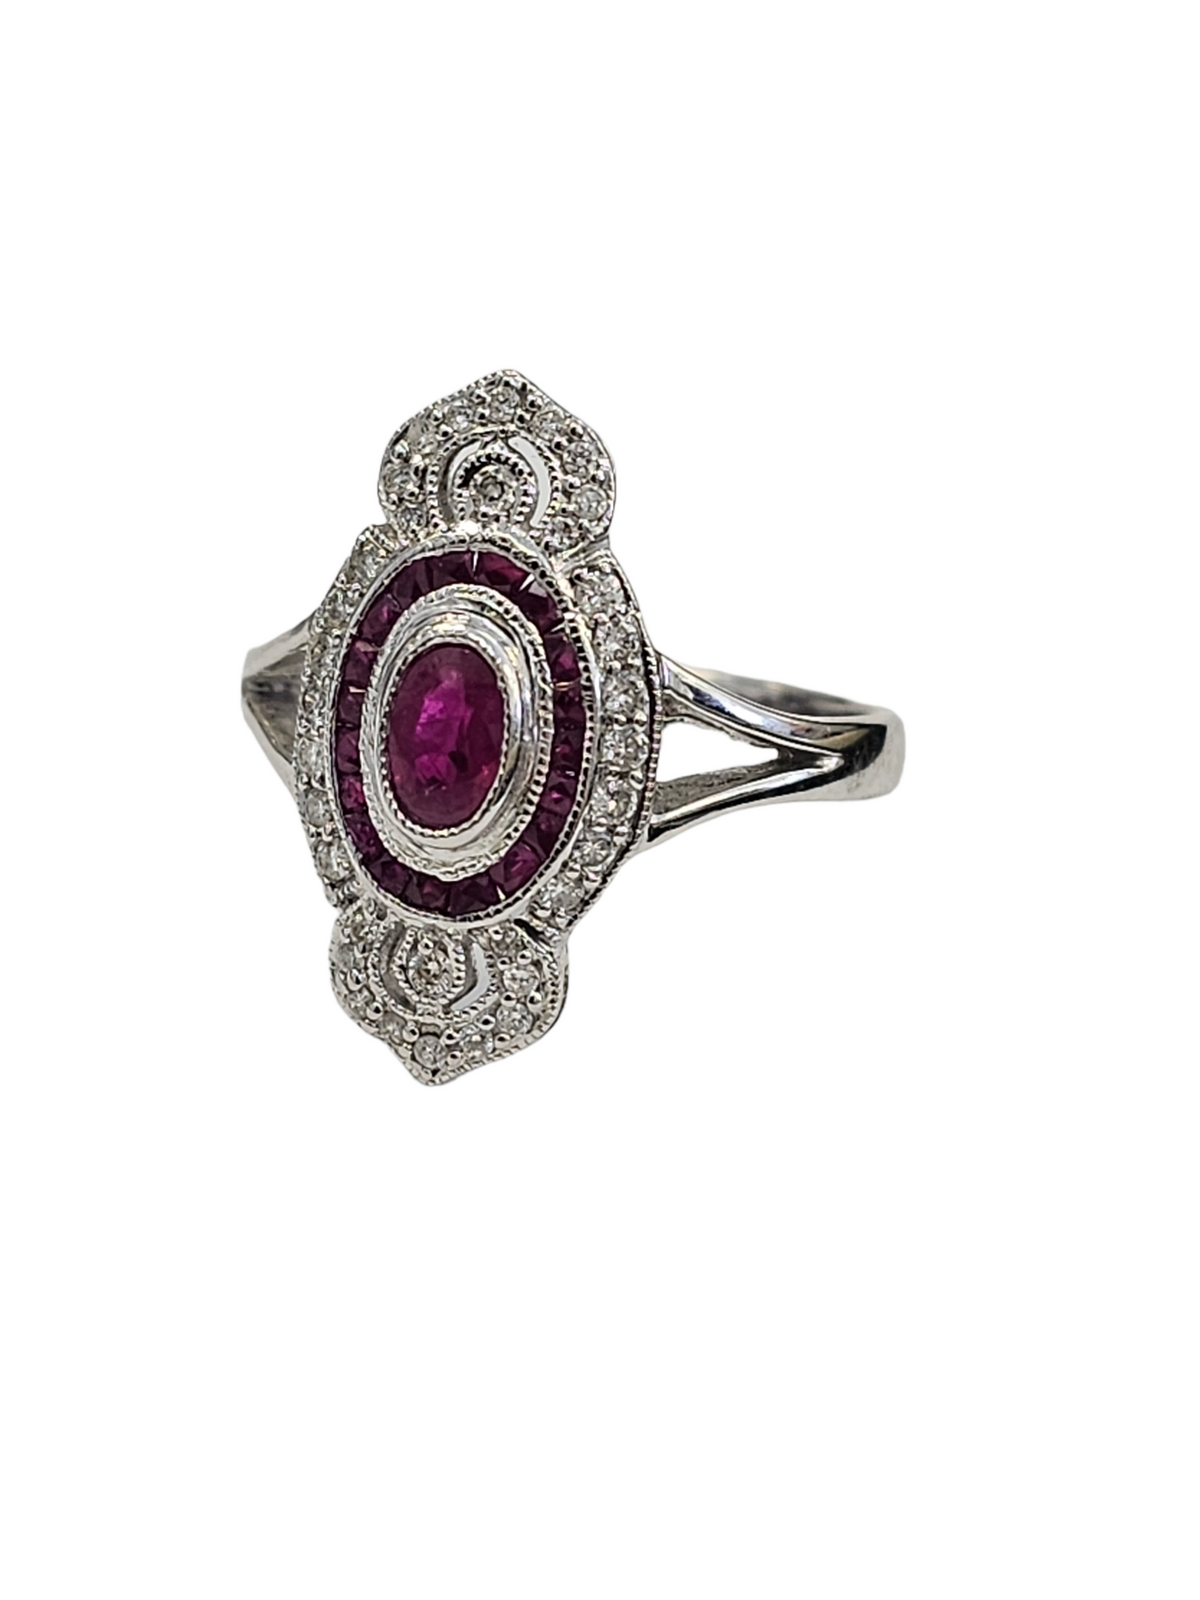 Ruby and Diamond Ring, 14kt White gold